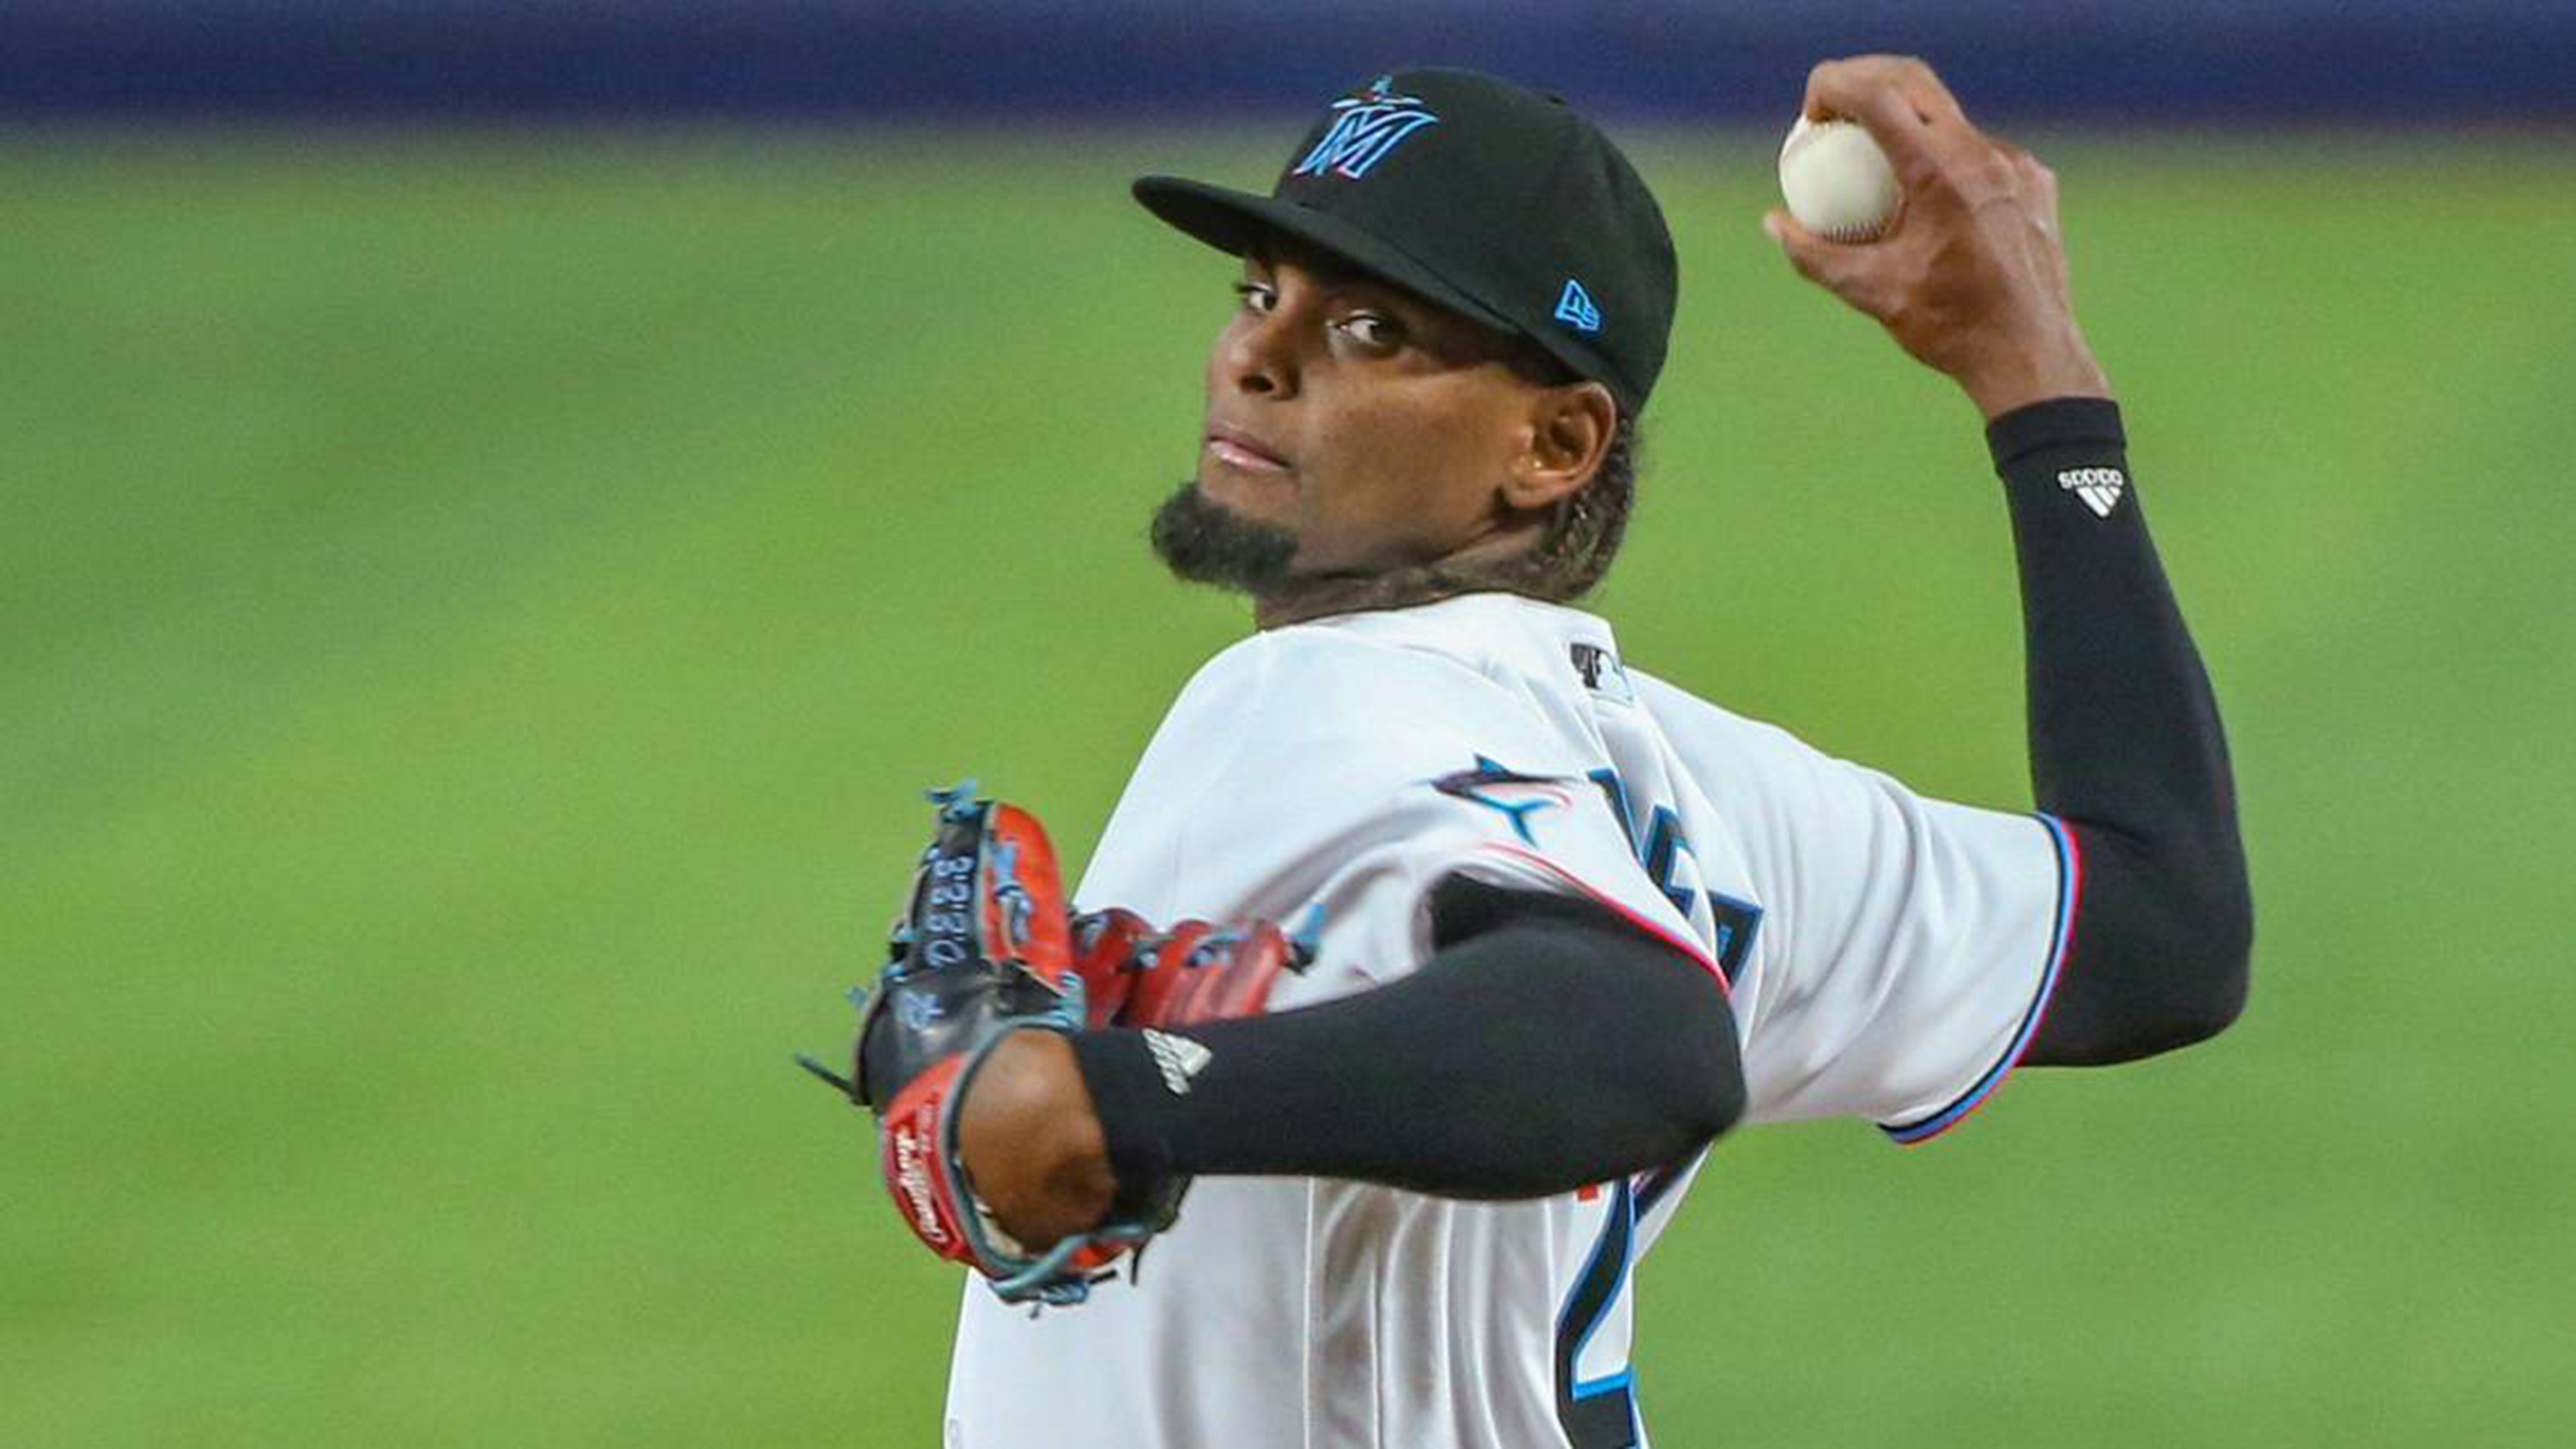 Miami Marlins starting pitcher Edward Cabrera (27) pitches in the first inning against the Washington Nationals at loanDepot park in Miami on Tuesday, June 7, 2022.